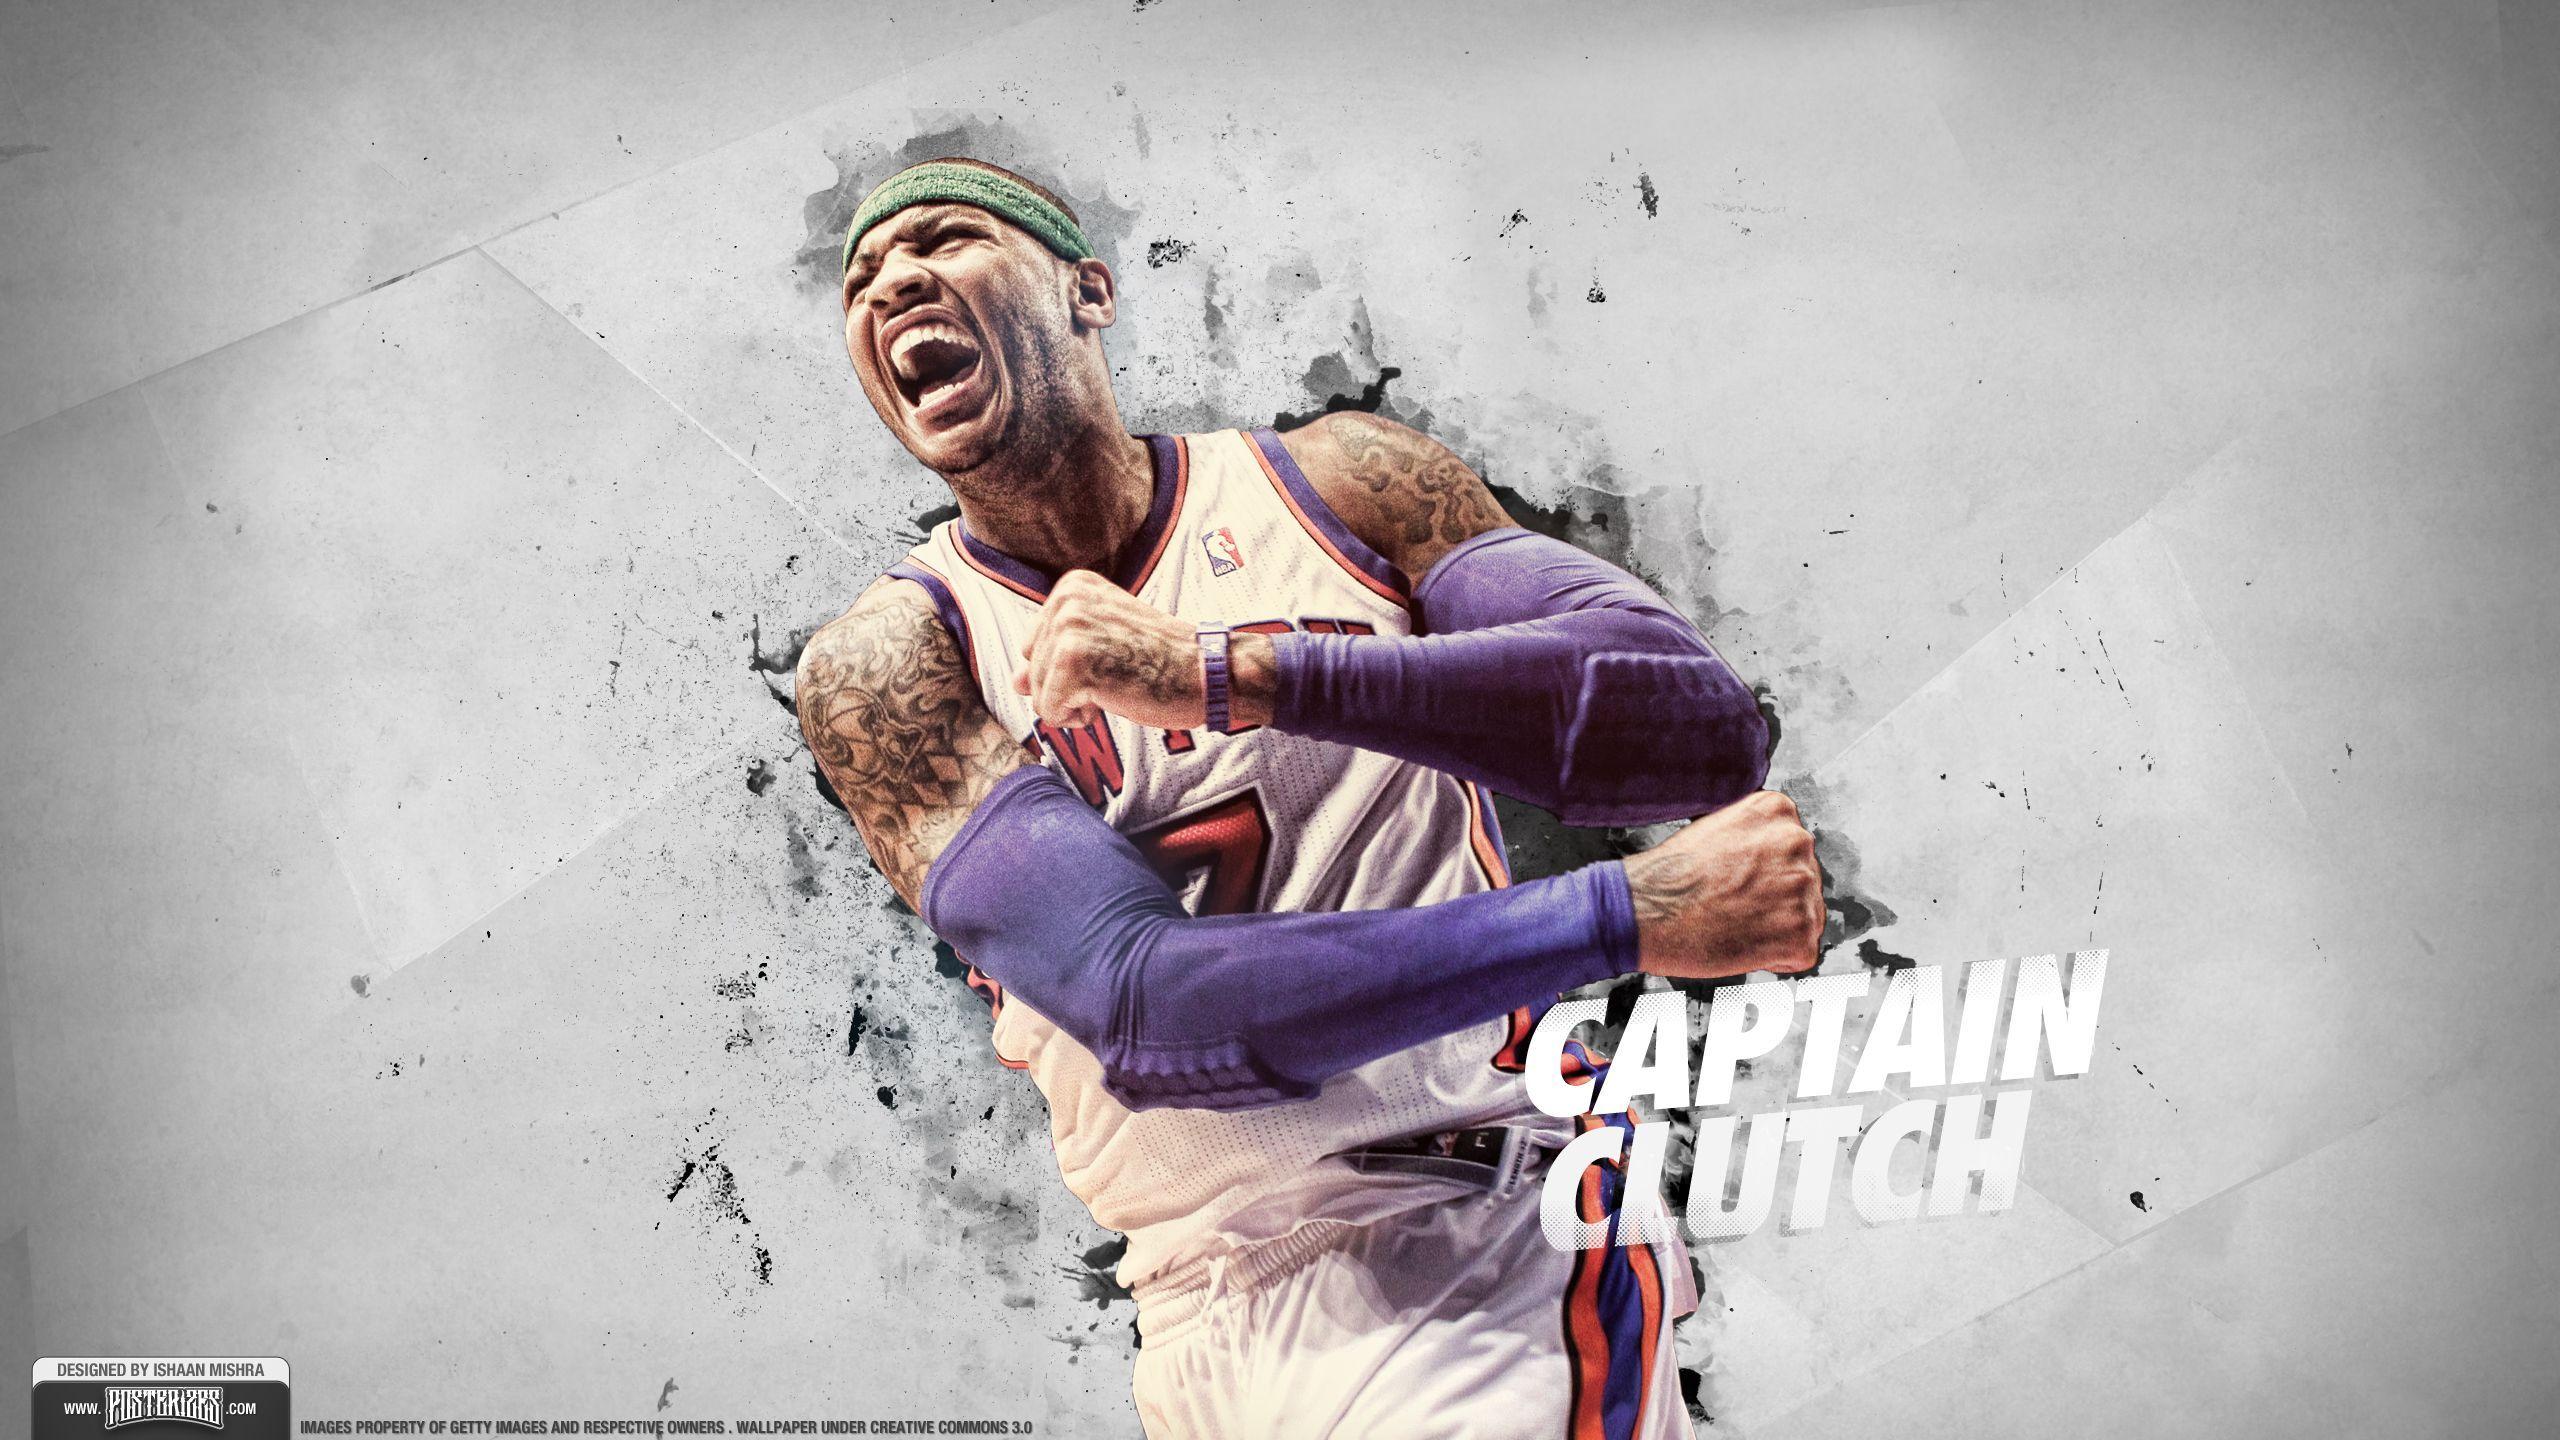 Wallpaper: Carmelo Anthony - 'Clutch'